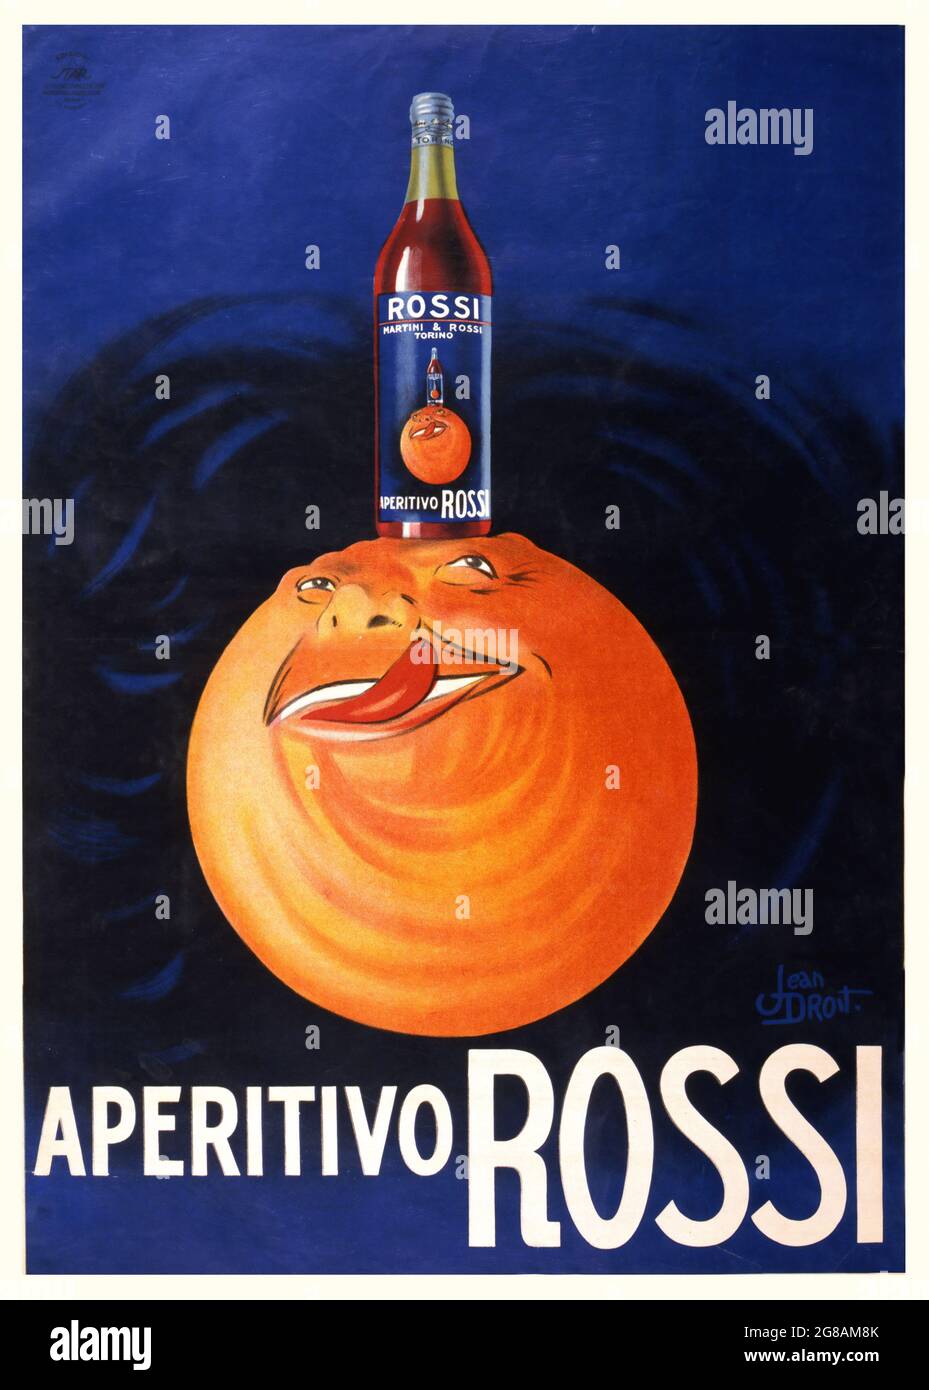 Vintage advertisement for Aperitivo Rossi. Artwork by Jean Droit (1884-1961). Old times advertising. A large orange with a bottle of Rossi on the head. Stock Photo